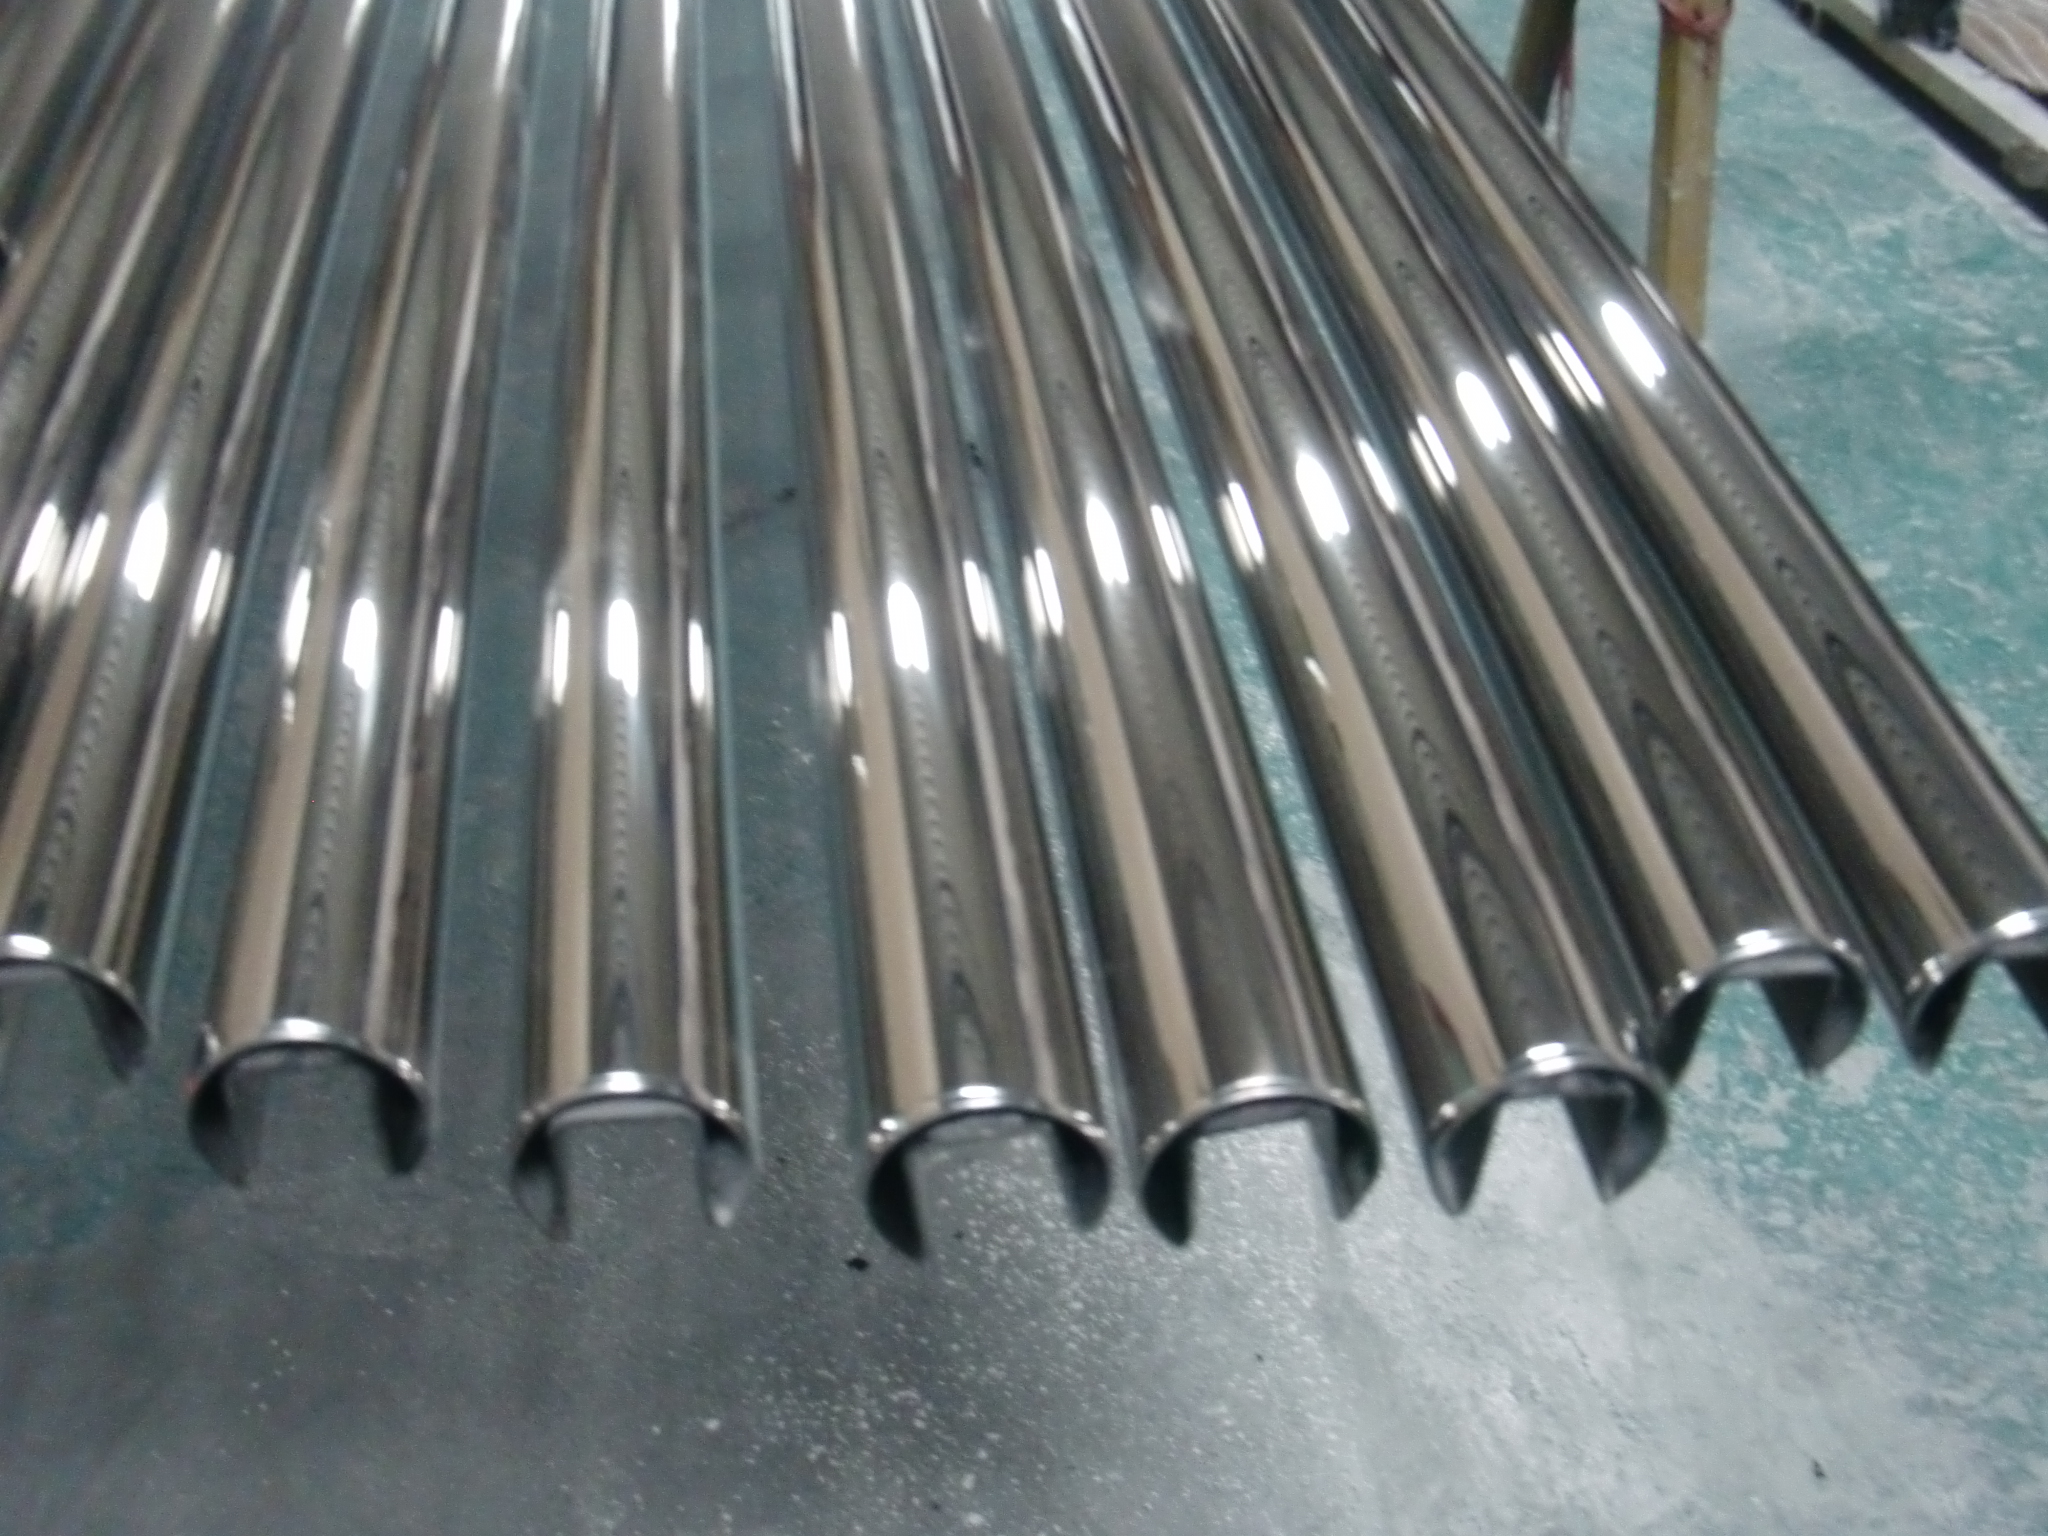 Round slotted tube, Stainless Steel Single Slot Slotted Tube, Stainless  Steel Double Slotted Round Tube, channel tube, slotted tube, slotted tubes-  Maytun International Corp, Top Sunny Group Corp